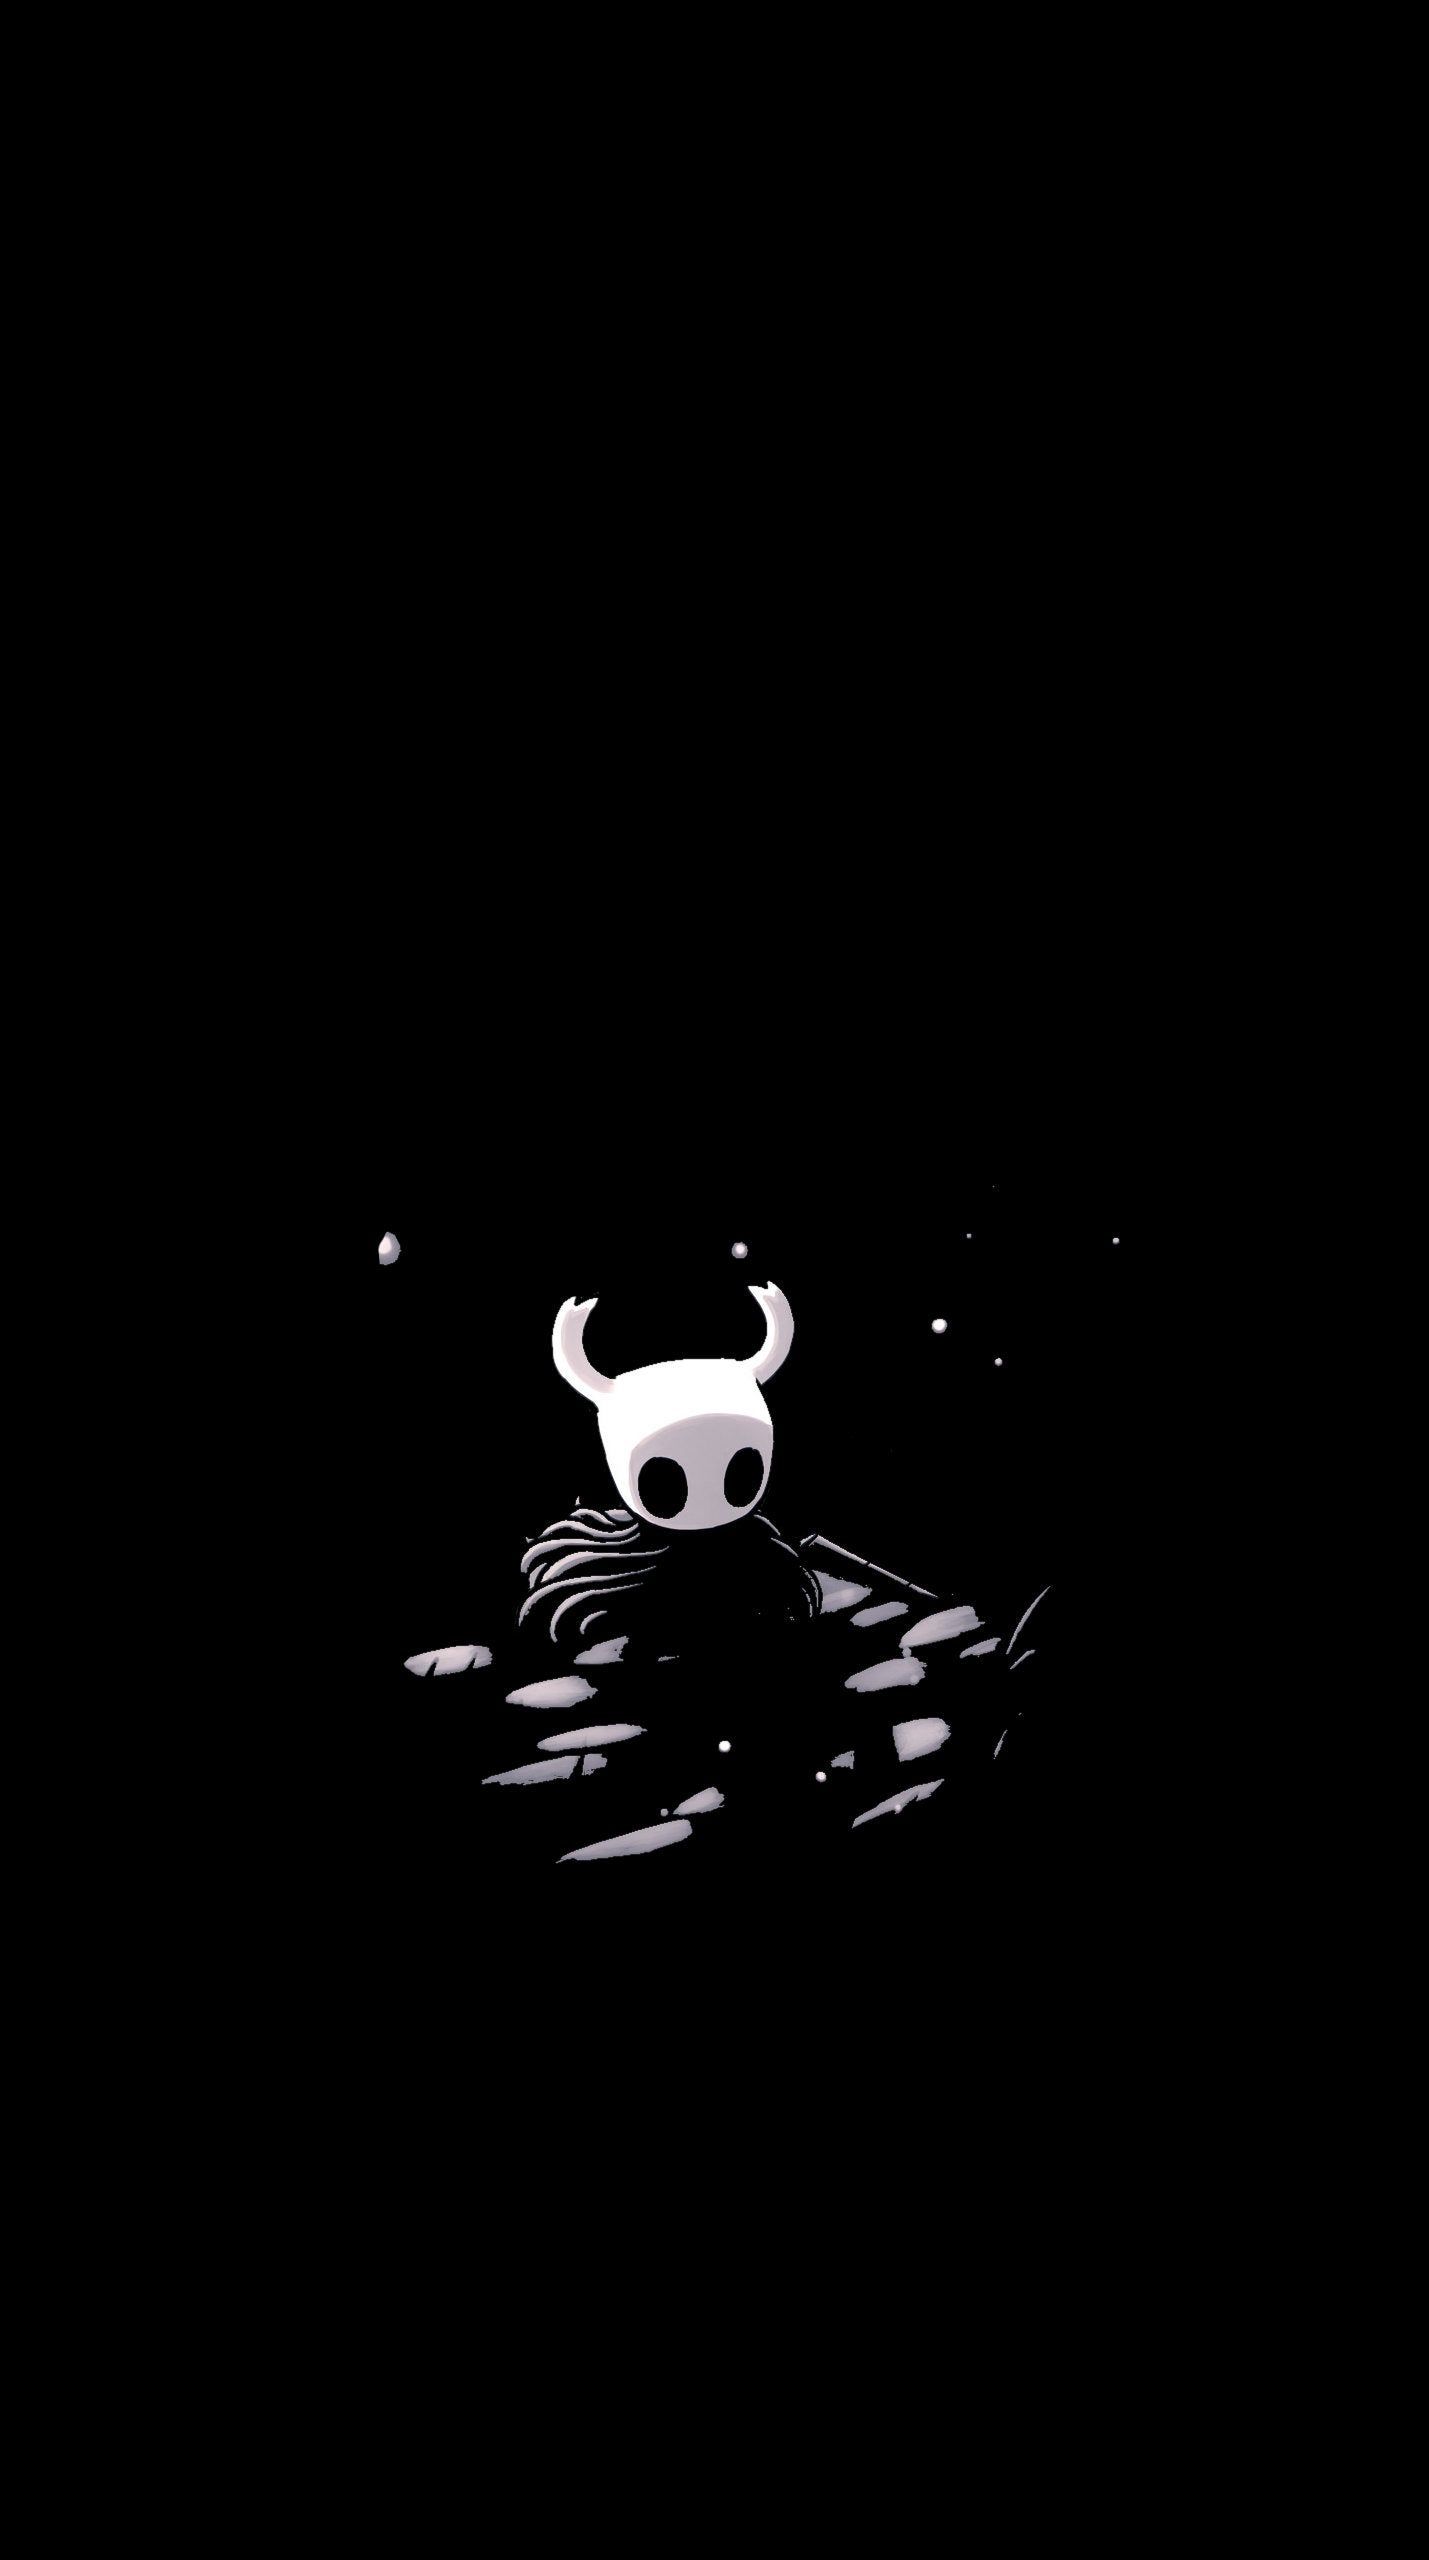 Hollow Knight wallpaper for mobile